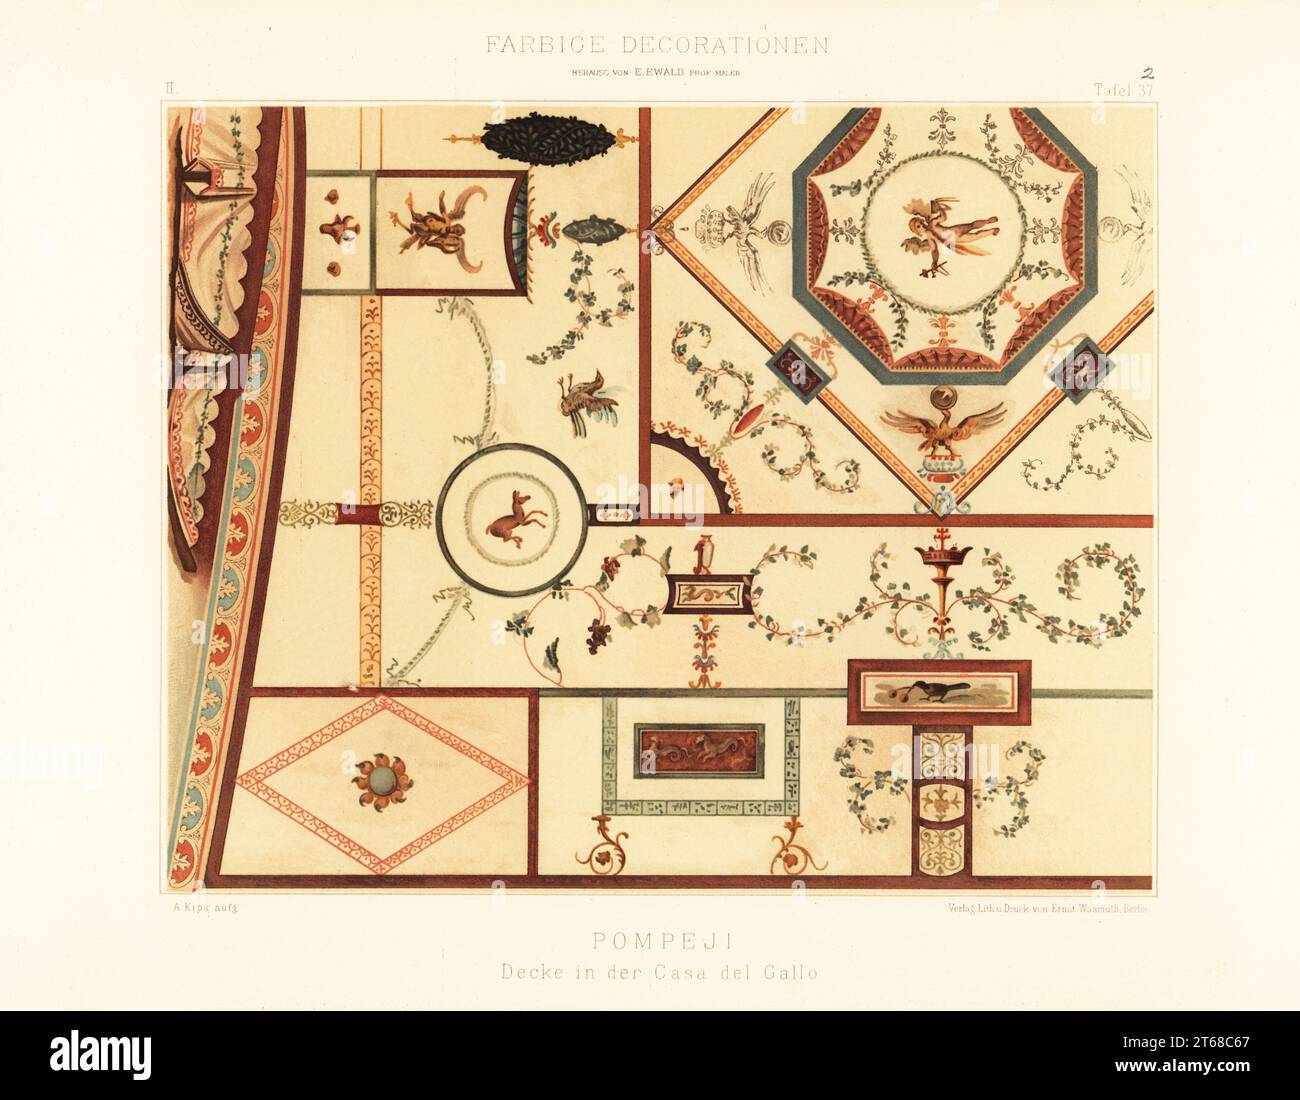 Part of a decorated ceiling from the House of Chlorus and Caprasia or Casa del Gallo II (Reg. IX, Ins. II, No. 10), Pompeii, Italy. Decke in der Casa del Gallo, Pompeji. Chromolithograph by A. Kips from Ernst Ewalds Farbige decorationen, alter und never Zeit (Color decoration, ancient and new eras), Ernst Wasmuth, Berlin, 1889. Stock Photo